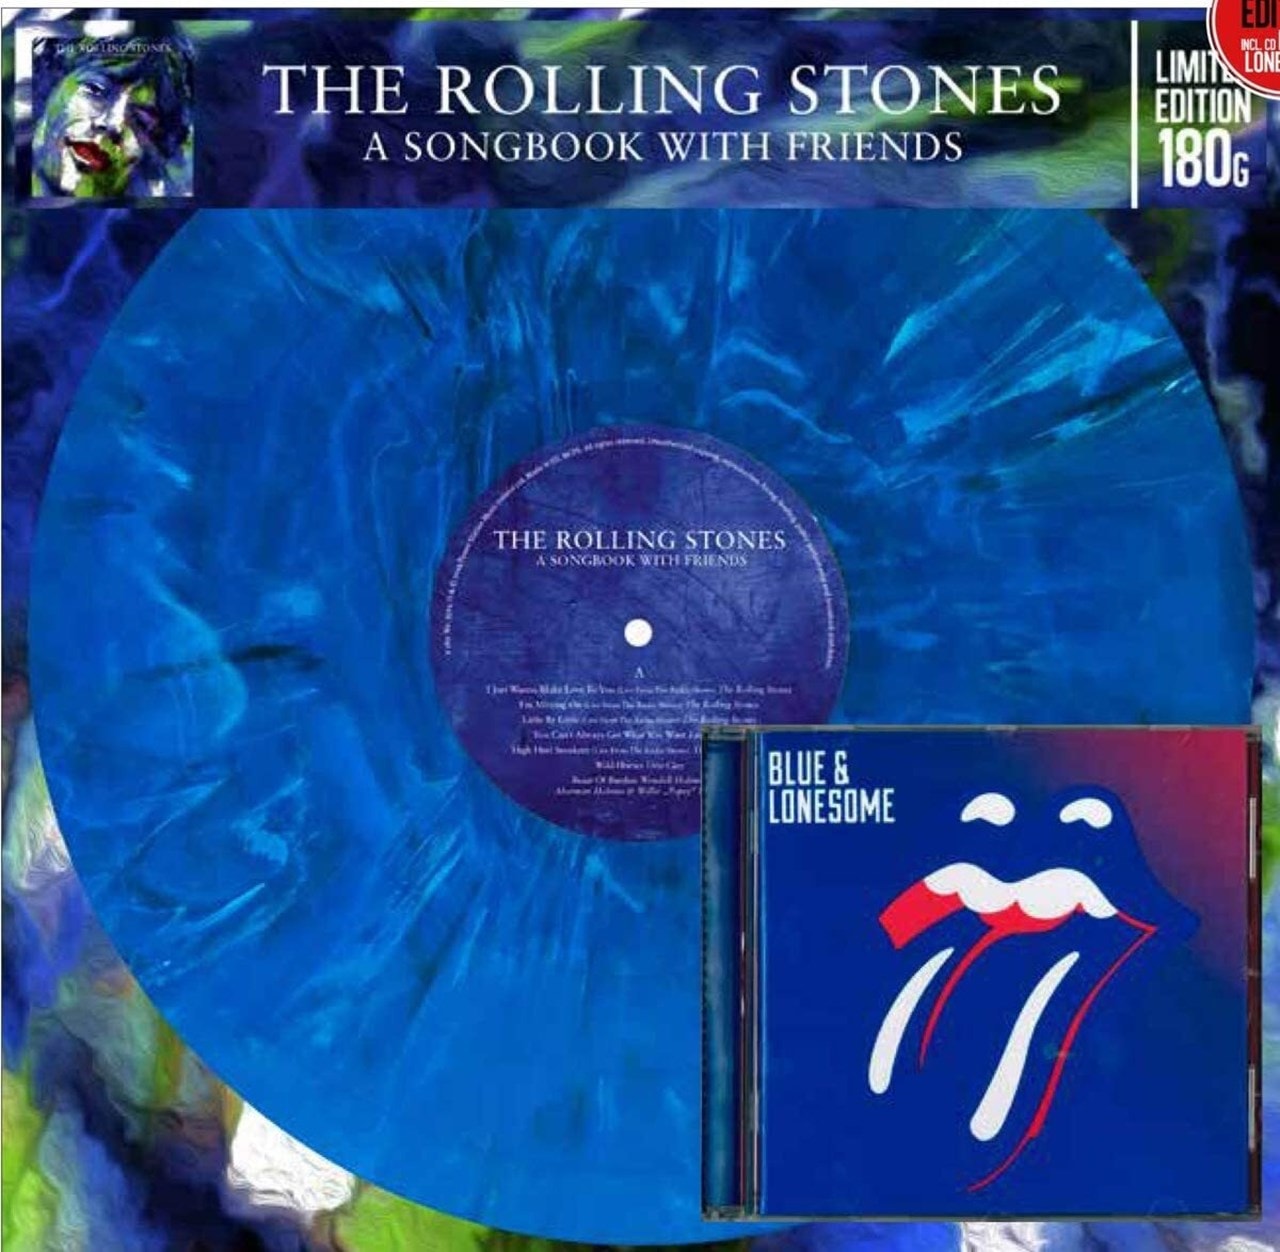 Rolling stones blues. Rolling Stones Blue and Lonesome. 2016 Blue & Lonesome. The Rolling Stones Blue & Lonesome обложка альбома. The Rolling Stones – Blue & Lonesome 180 gram.